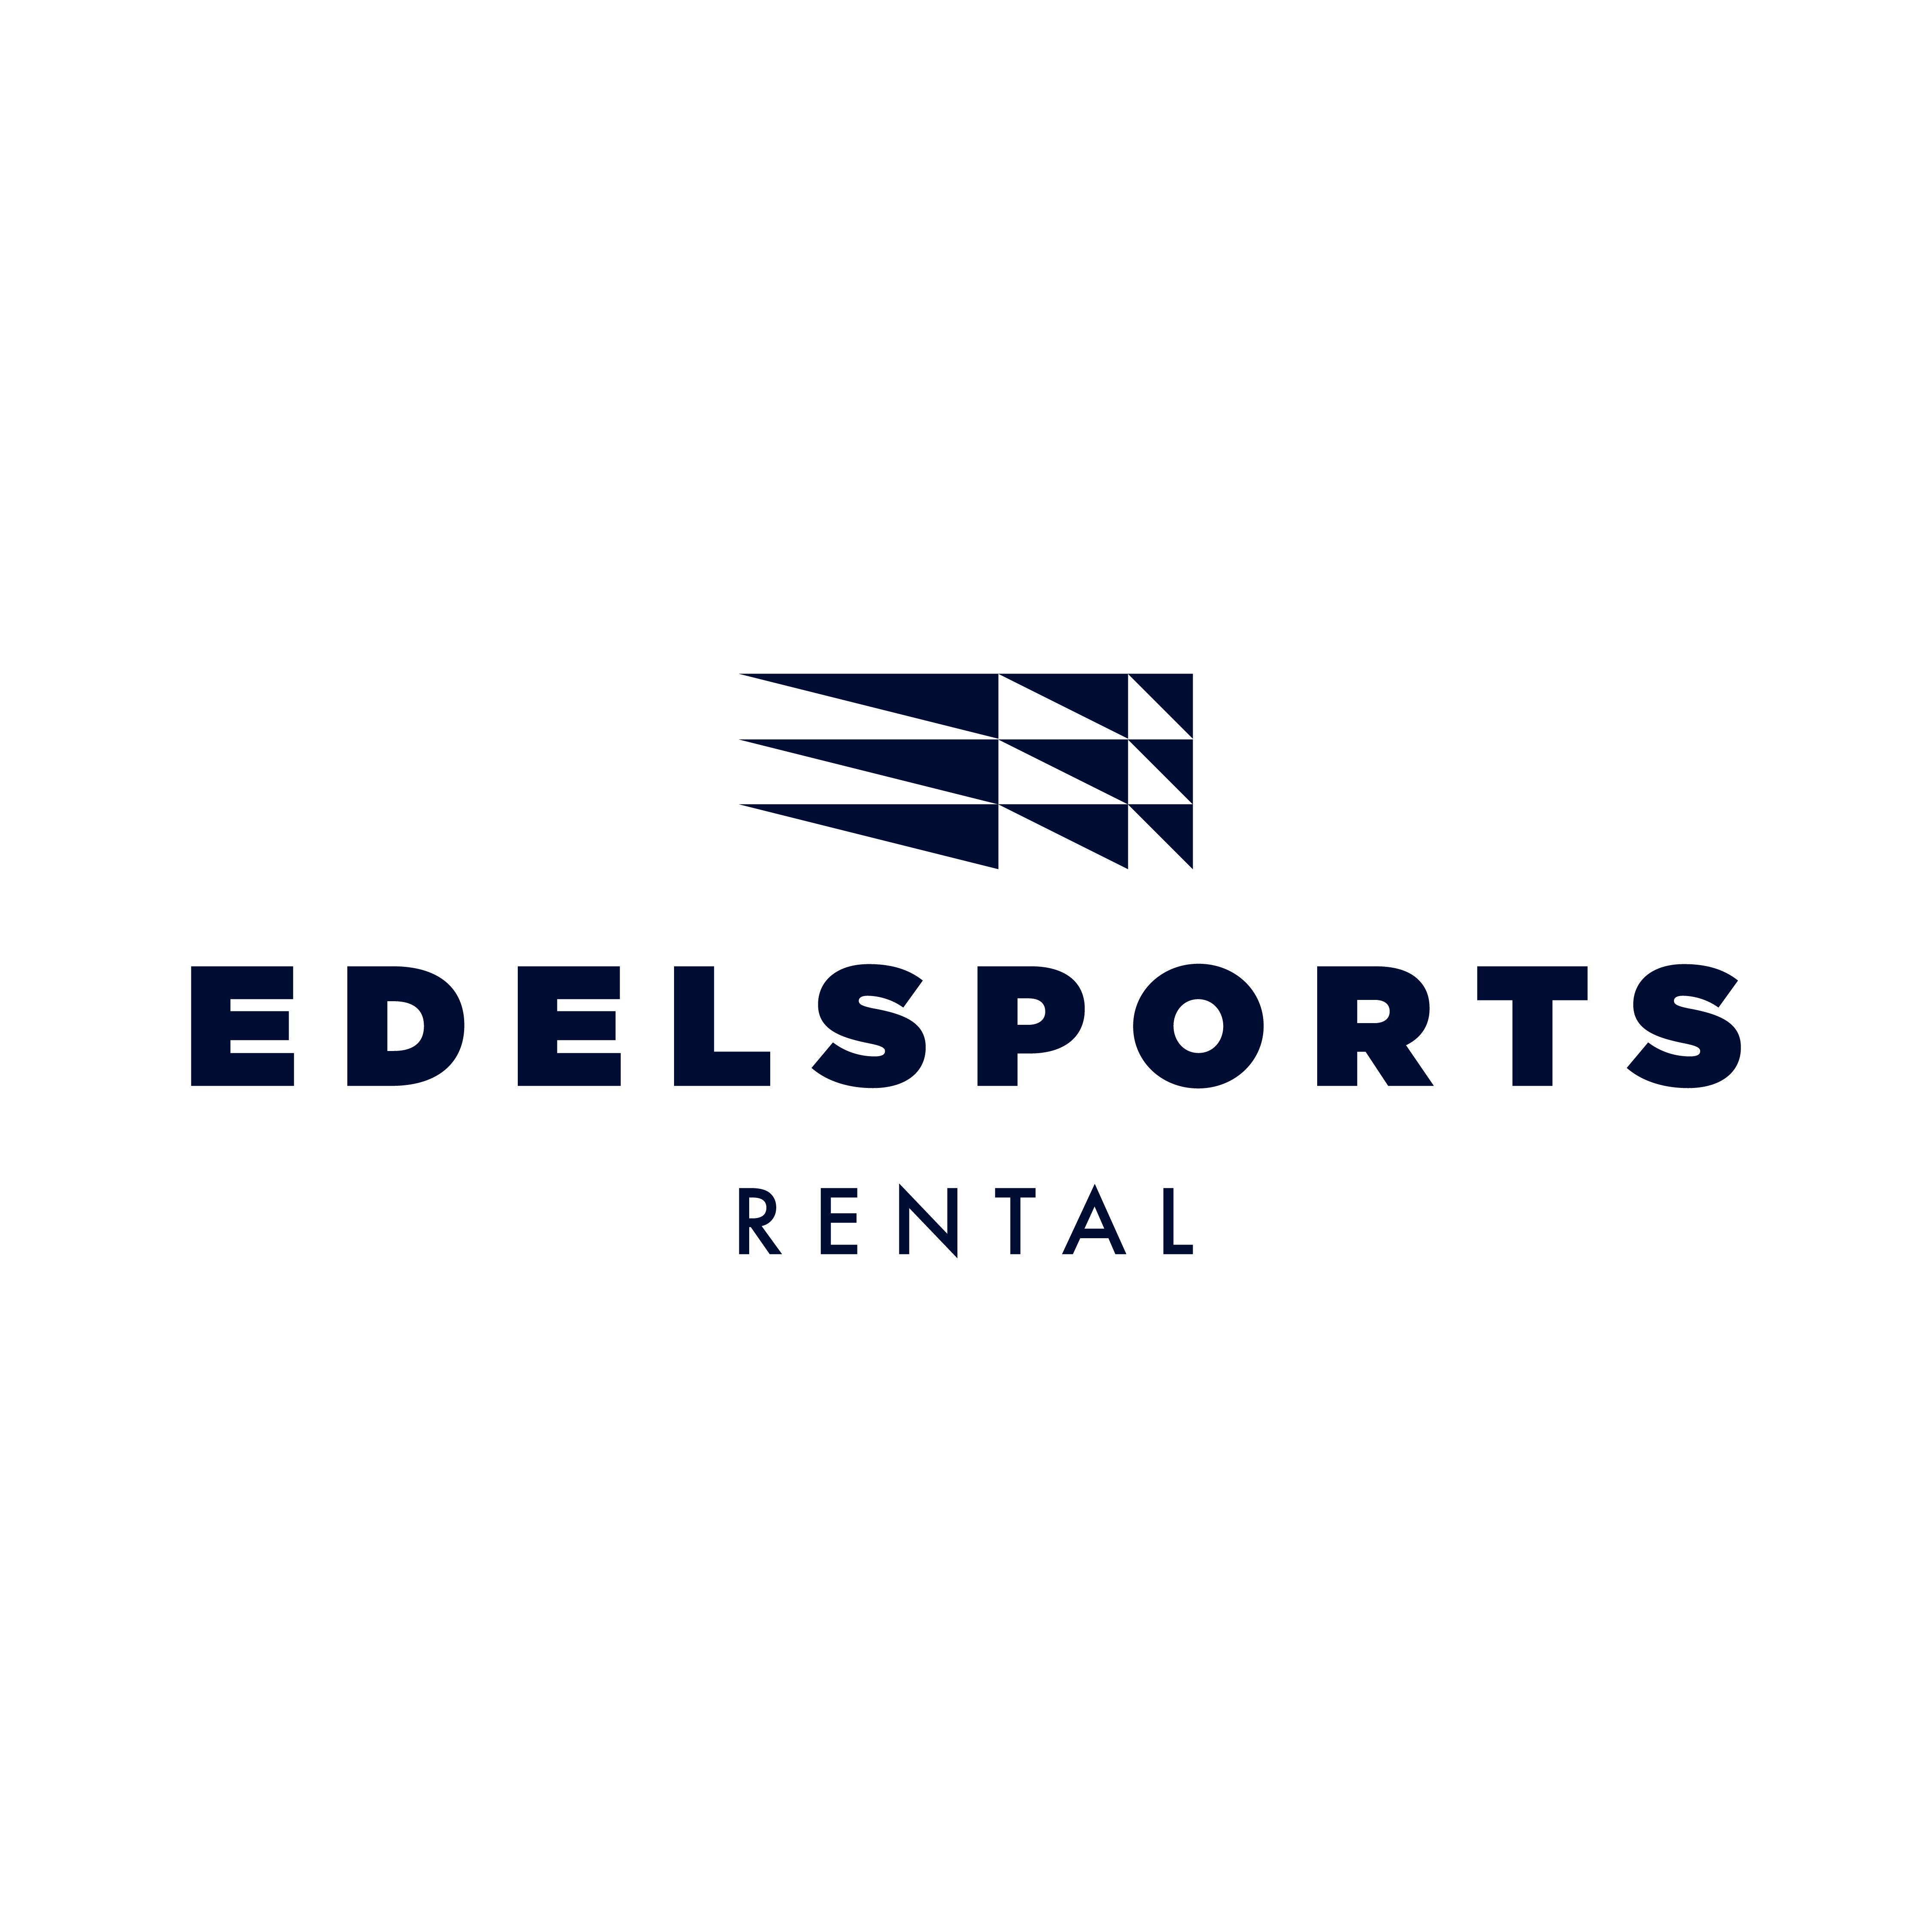 Edelsports logo design by logo designer Studio Puls for your inspiration and for the worlds largest logo competition